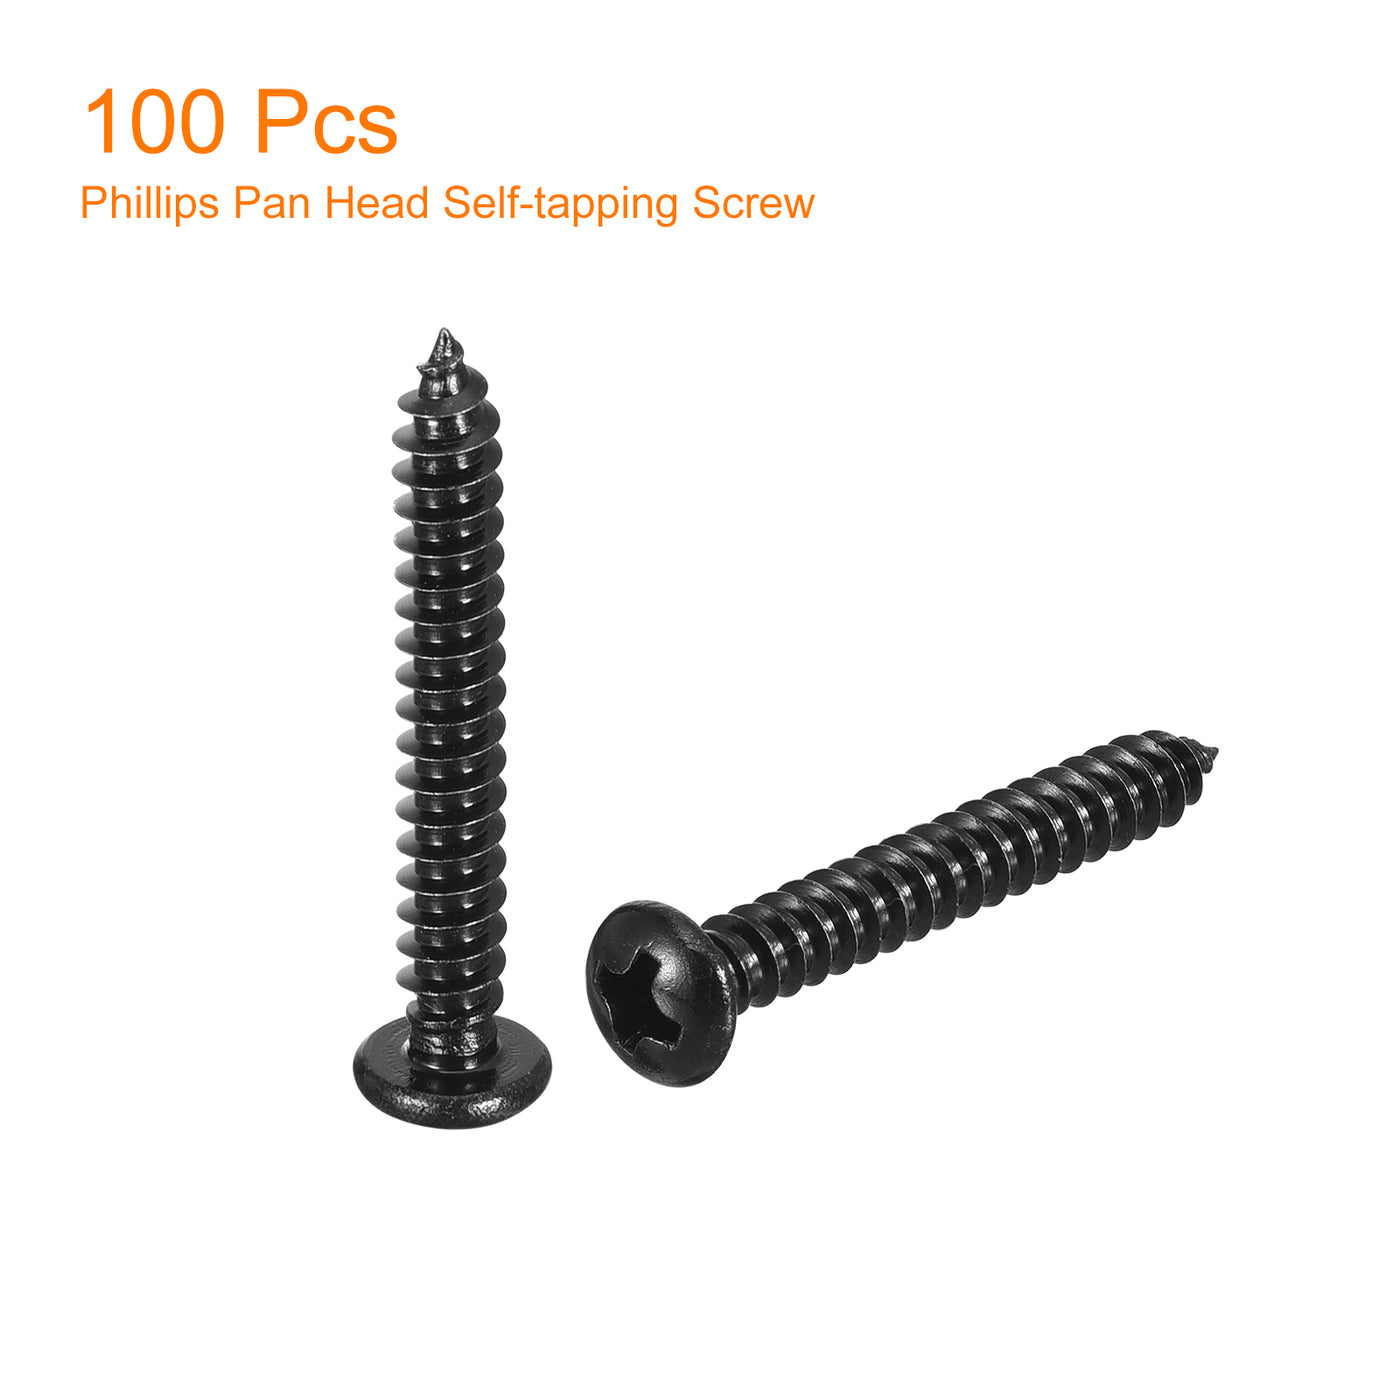 uxcell Uxcell #8 x 1-3/16" Phillips Pan Head Self-tapping Screw, 100pcs - 304 Stainless Steel Round Head Wood Screw Full Thread (Black)